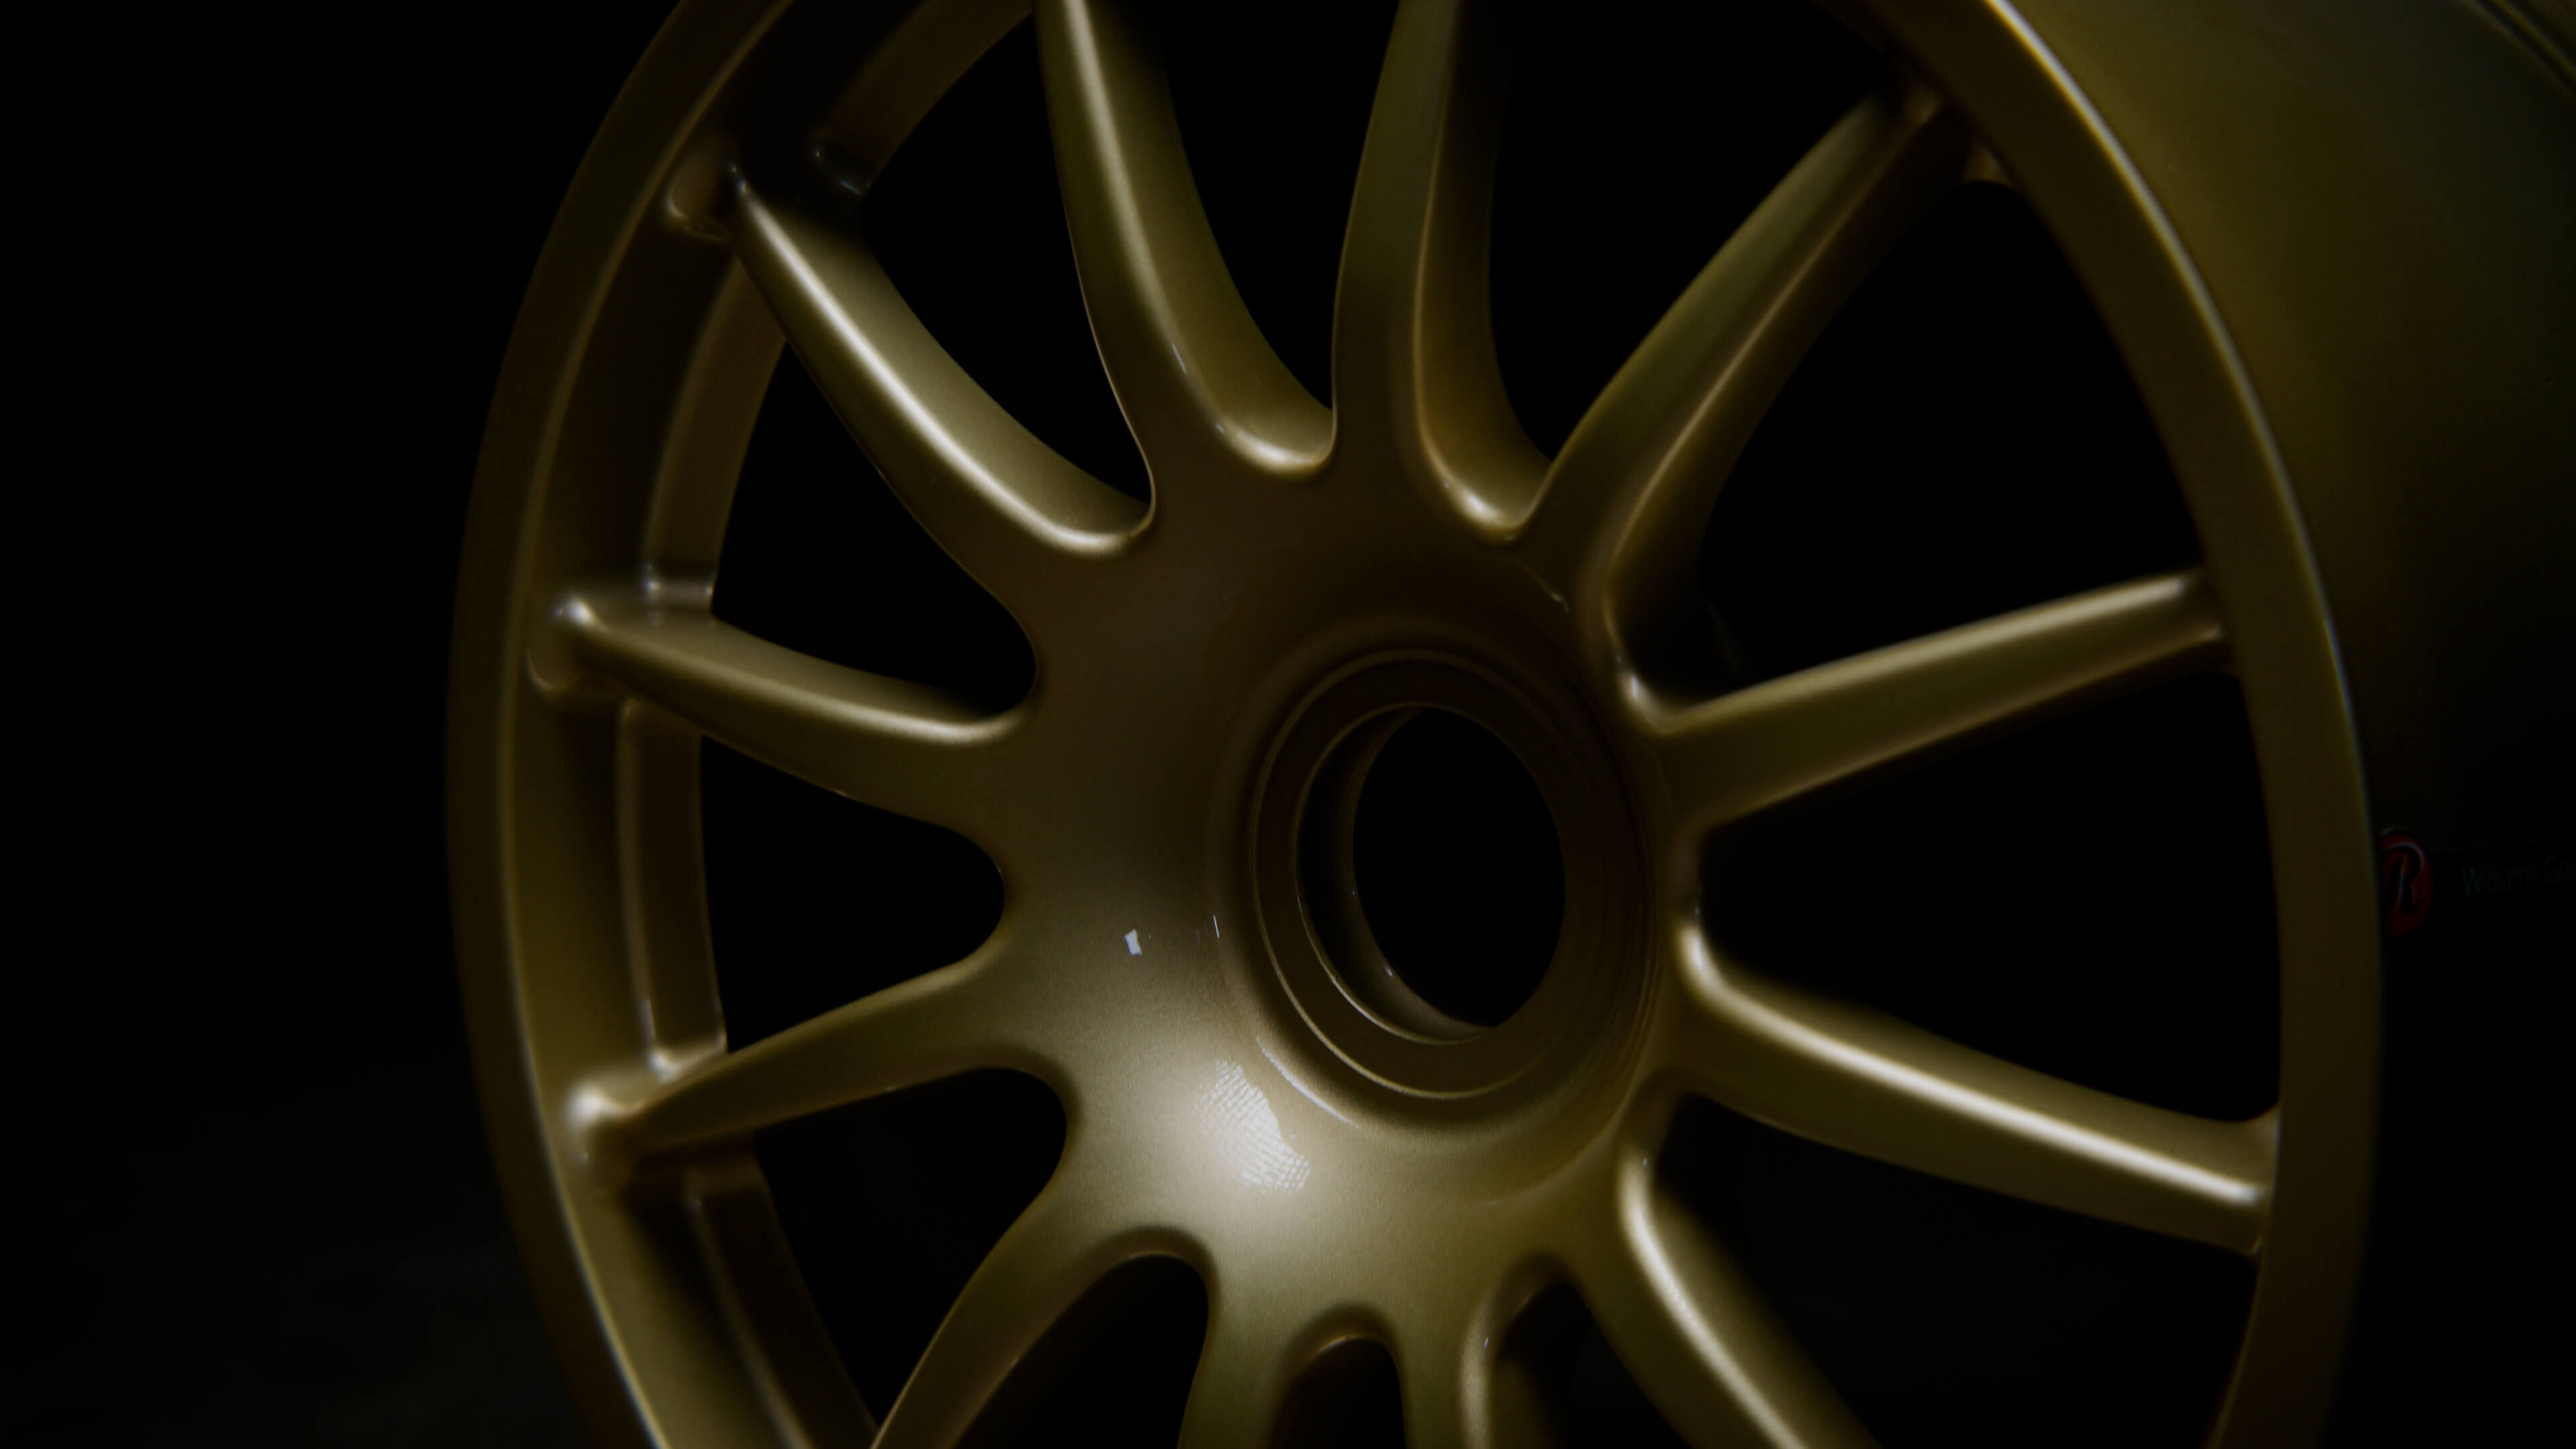 Powder Coated Alloy wheel refurbished by Rolling Rims